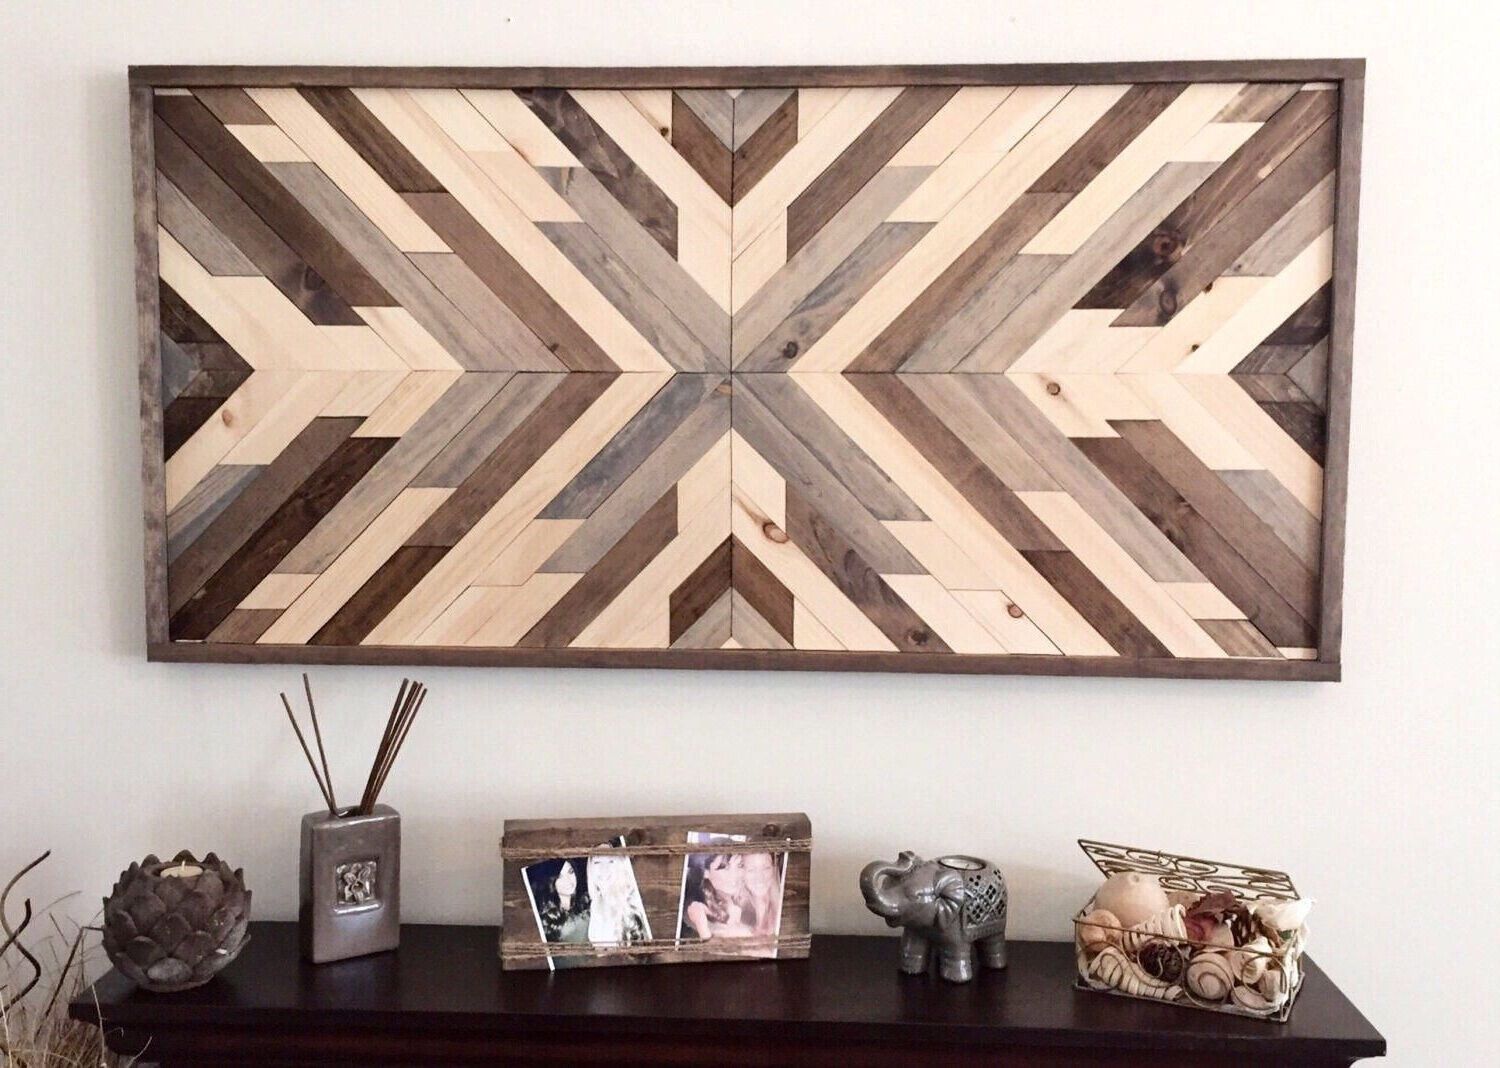 Reclaimed Wood Wall Art Within Recent Aztec Room Decor Unique Reclaimed Wood Wall Art Wood Art Wall Decor (View 12 of 15)